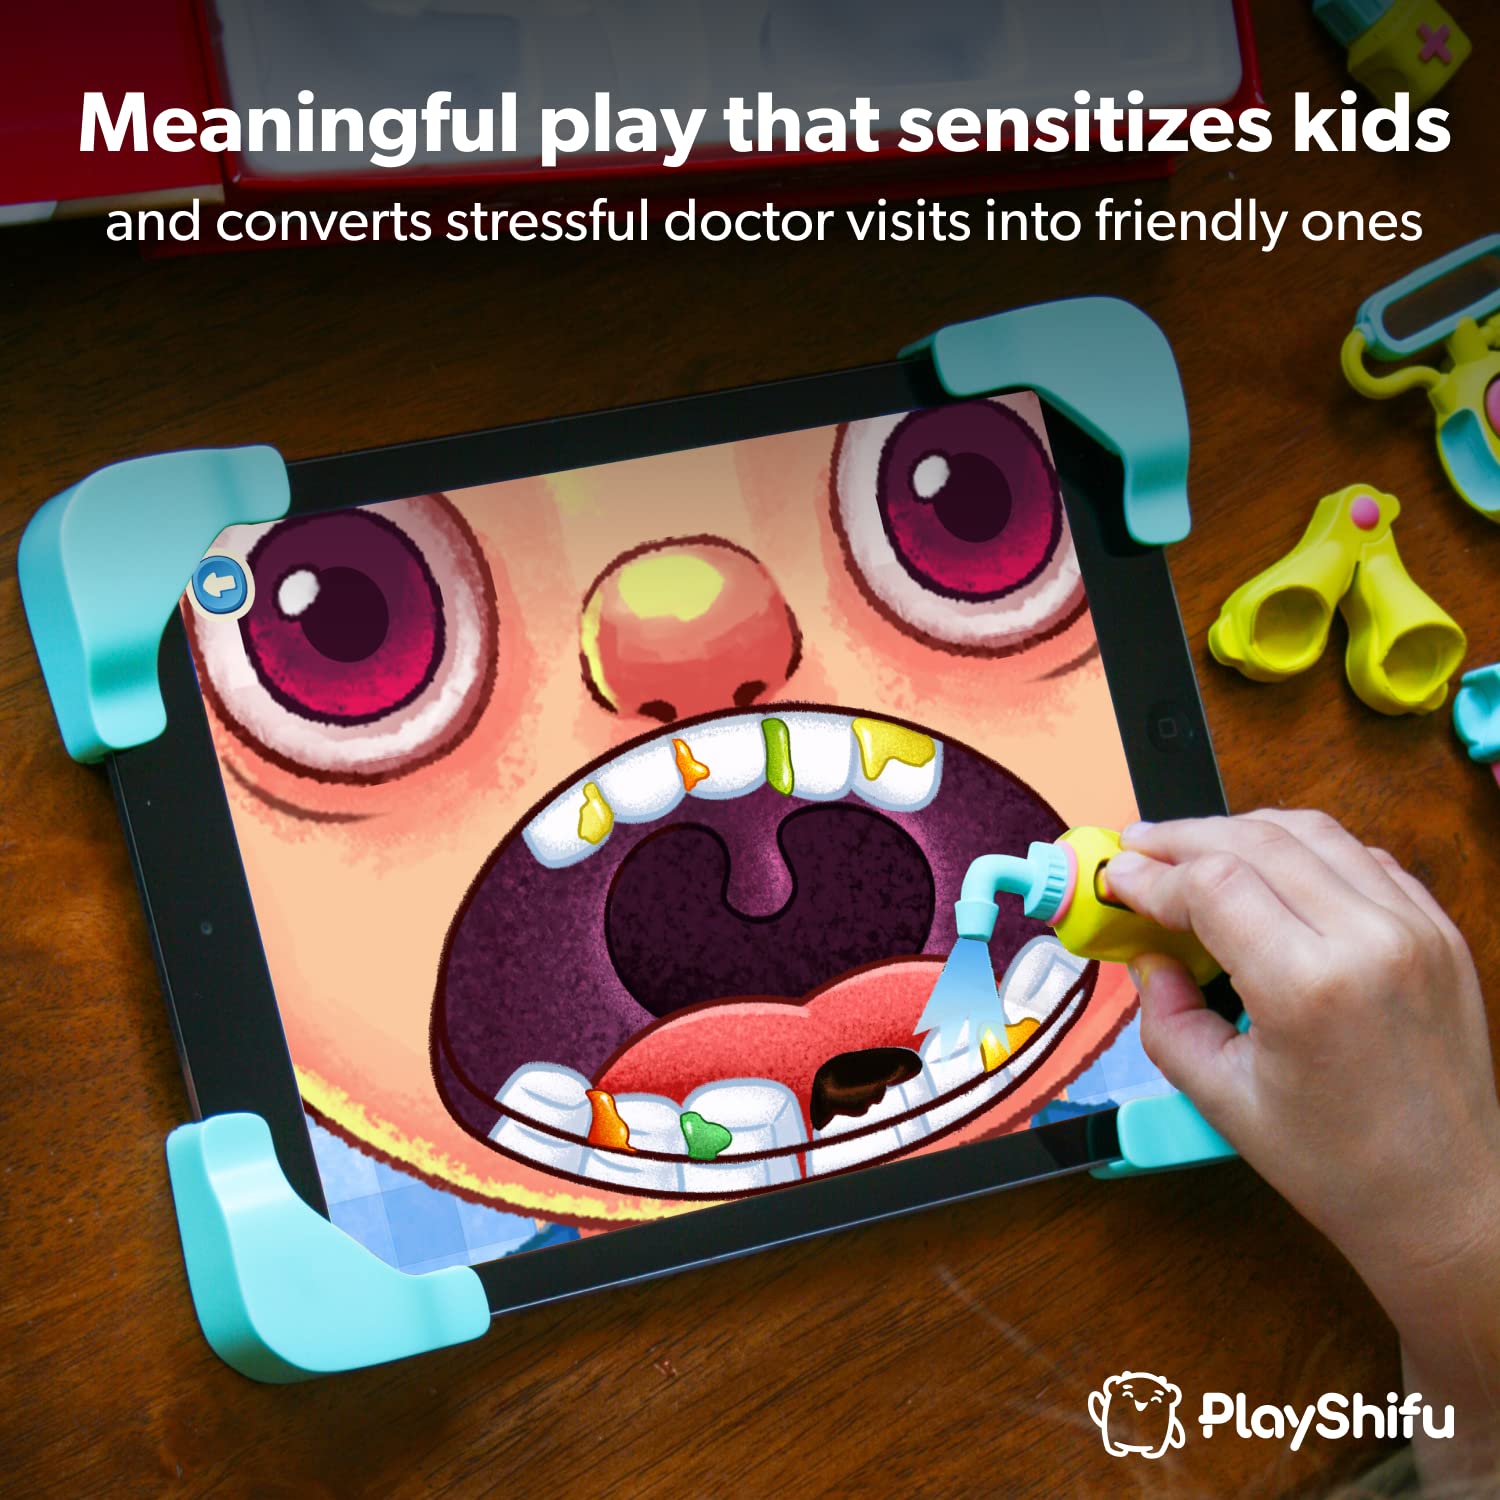 PlayShifu Tacto Doctor - Interactive STEM Pretend Play with Real Learning Game for Kids Ages 4 Years & Up (Tablet Not Included)